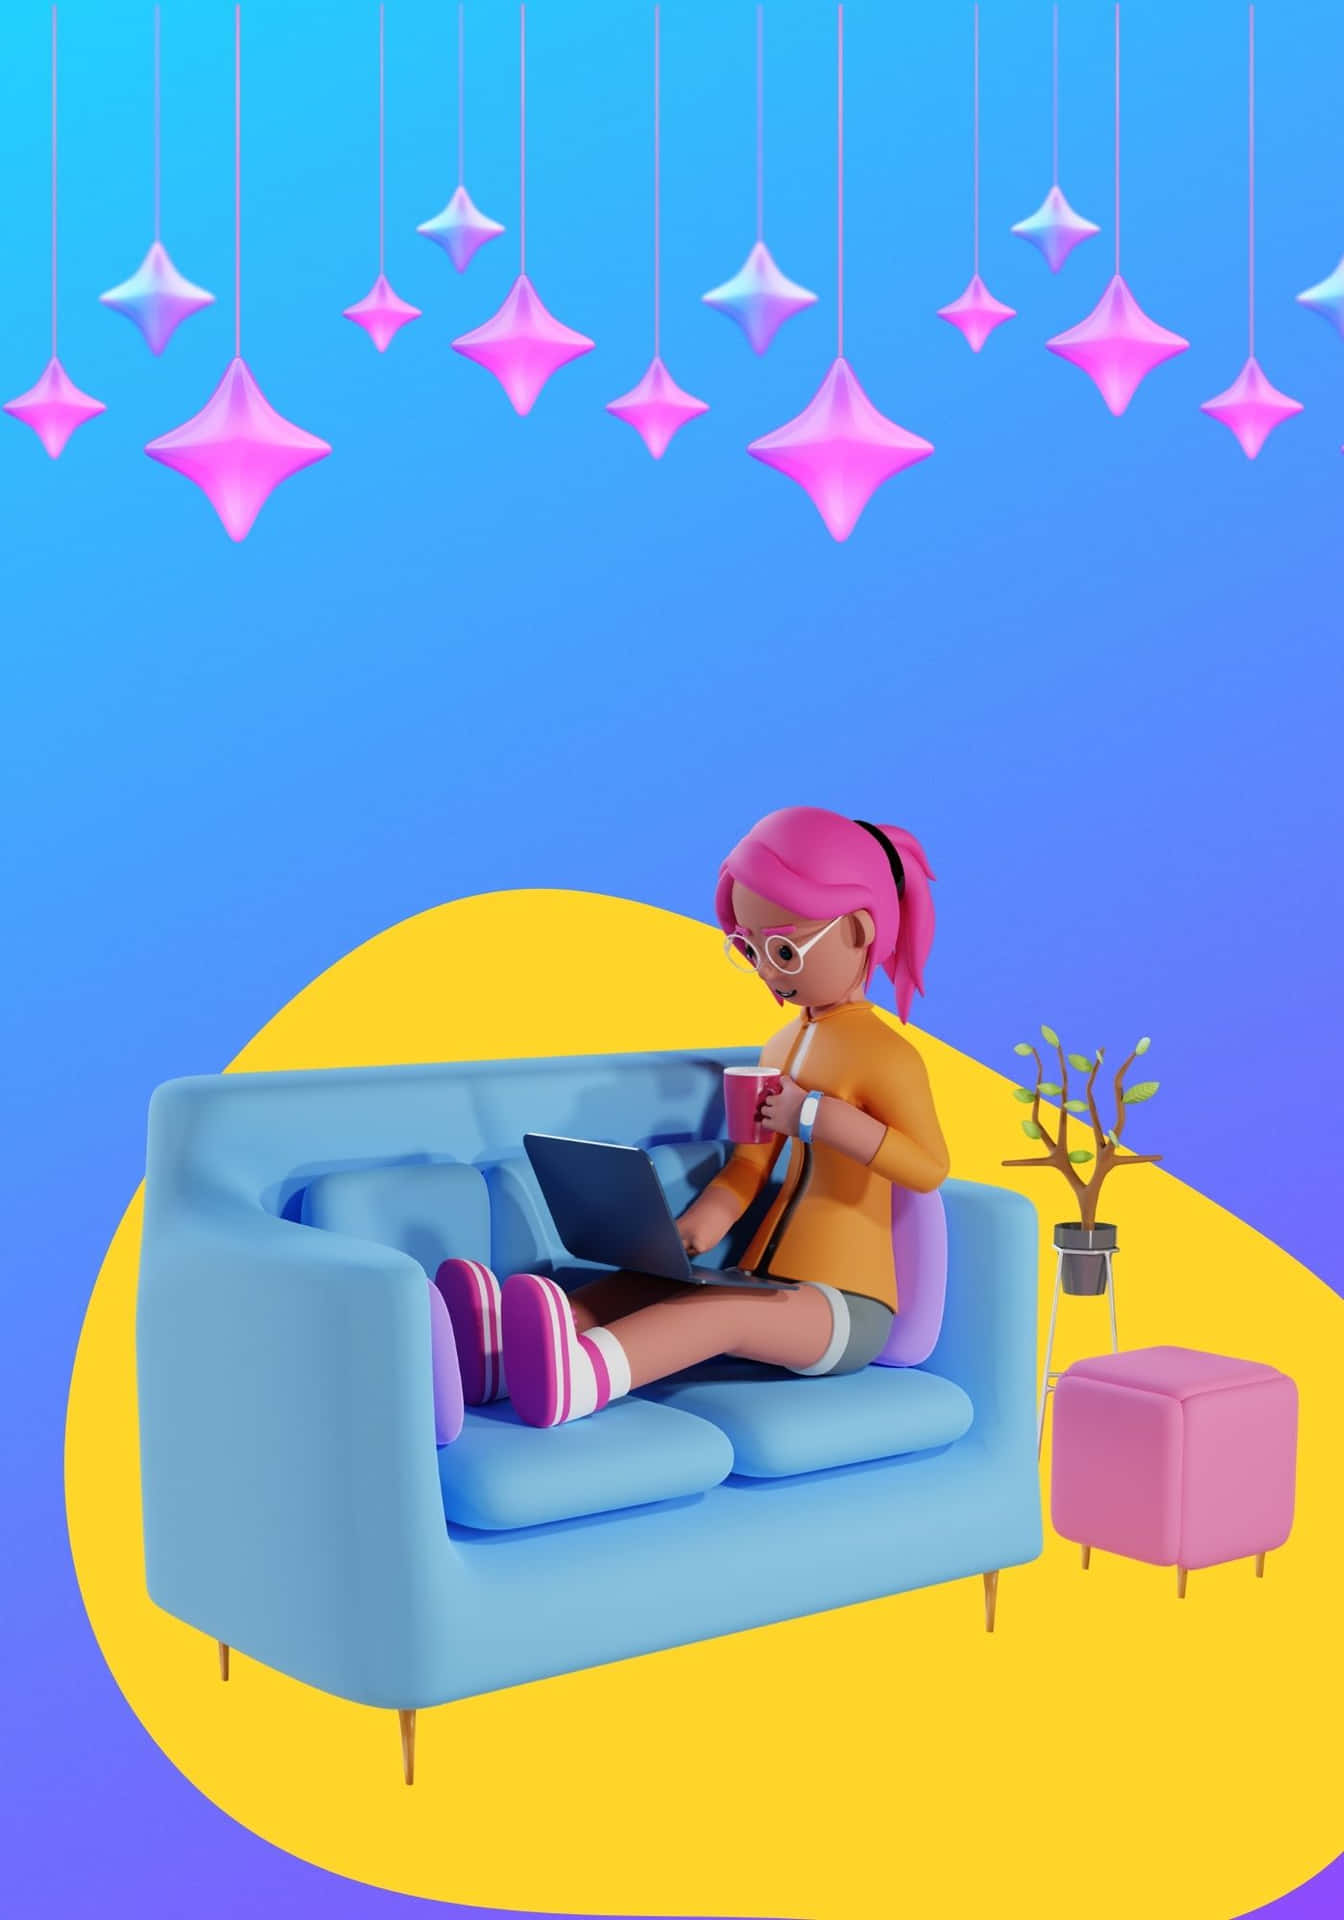 Cool 3D Woman On Blue Couch Background Wallpaper